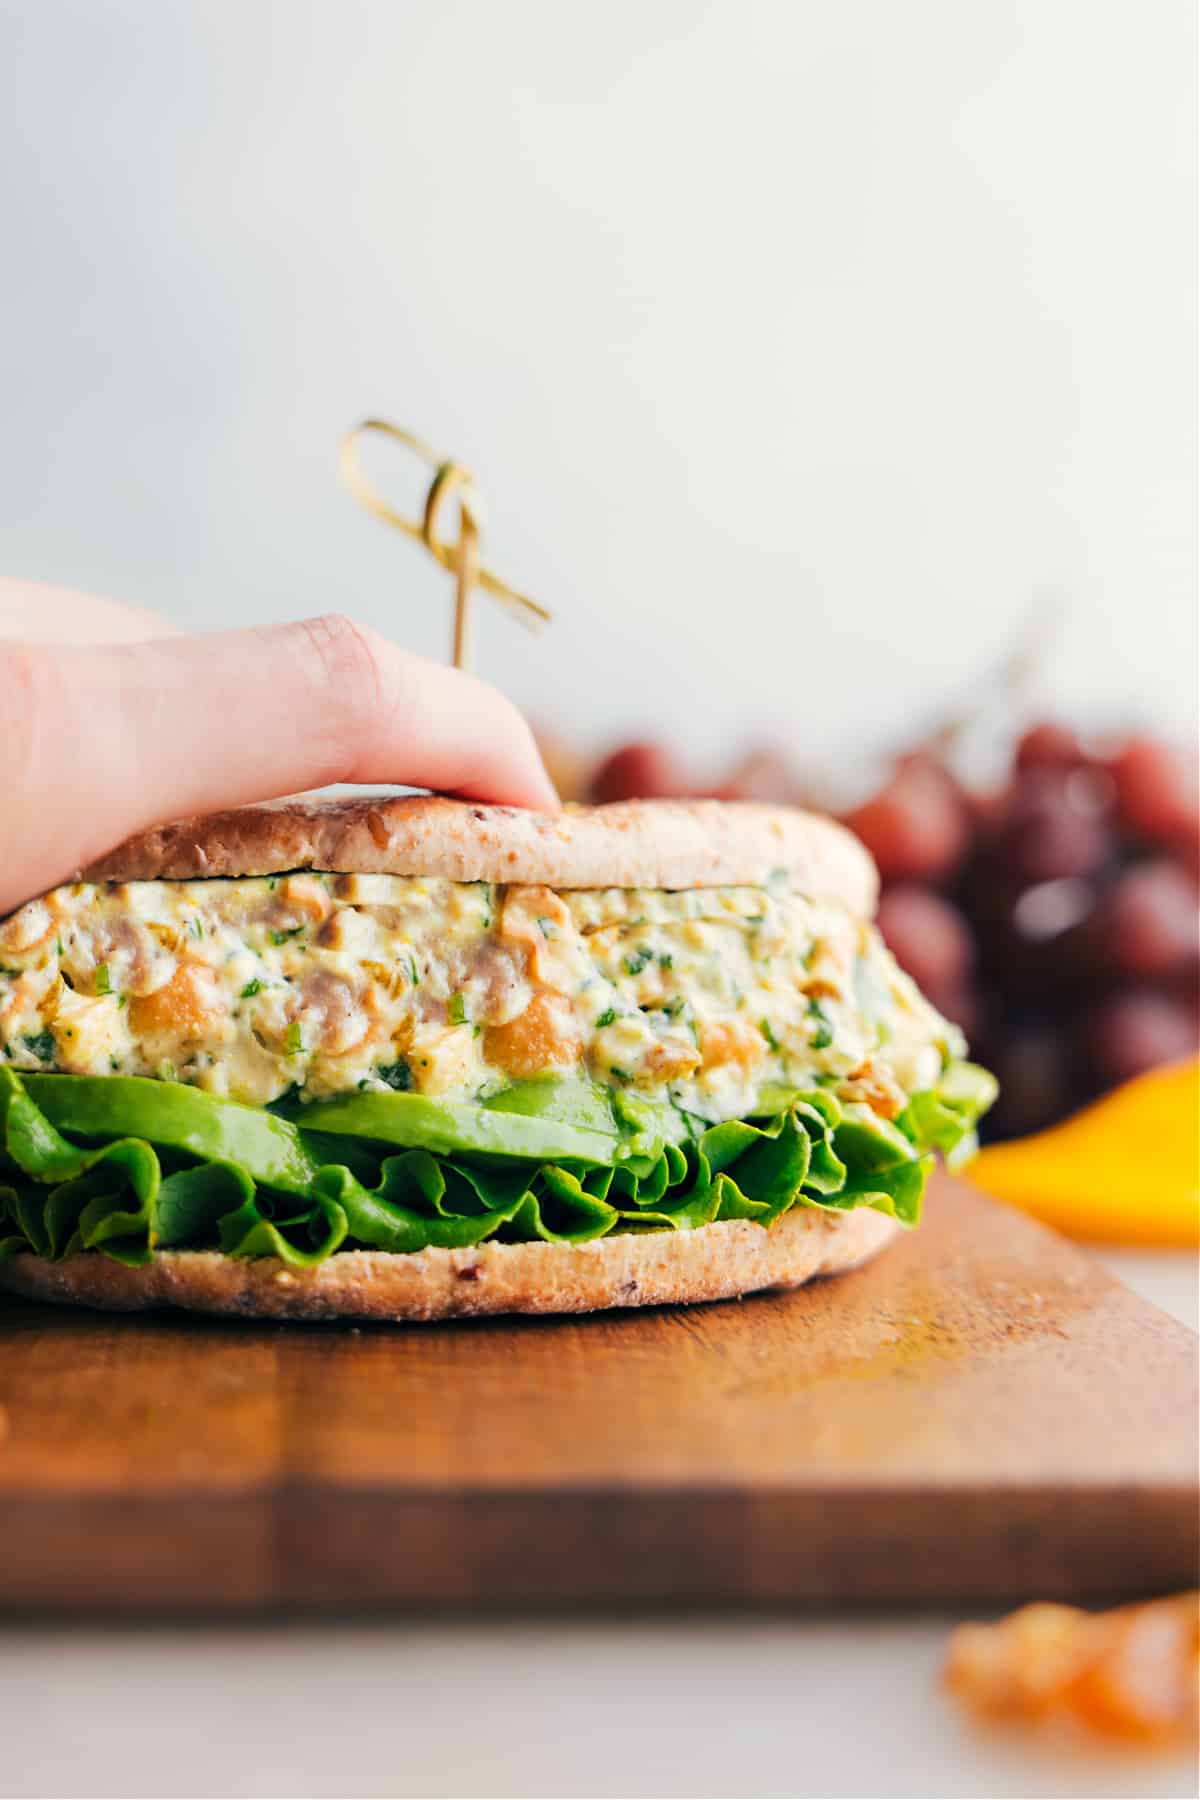 Curry Chicken Salad in a sandwich with lettuce and avocado, the perfect mix.